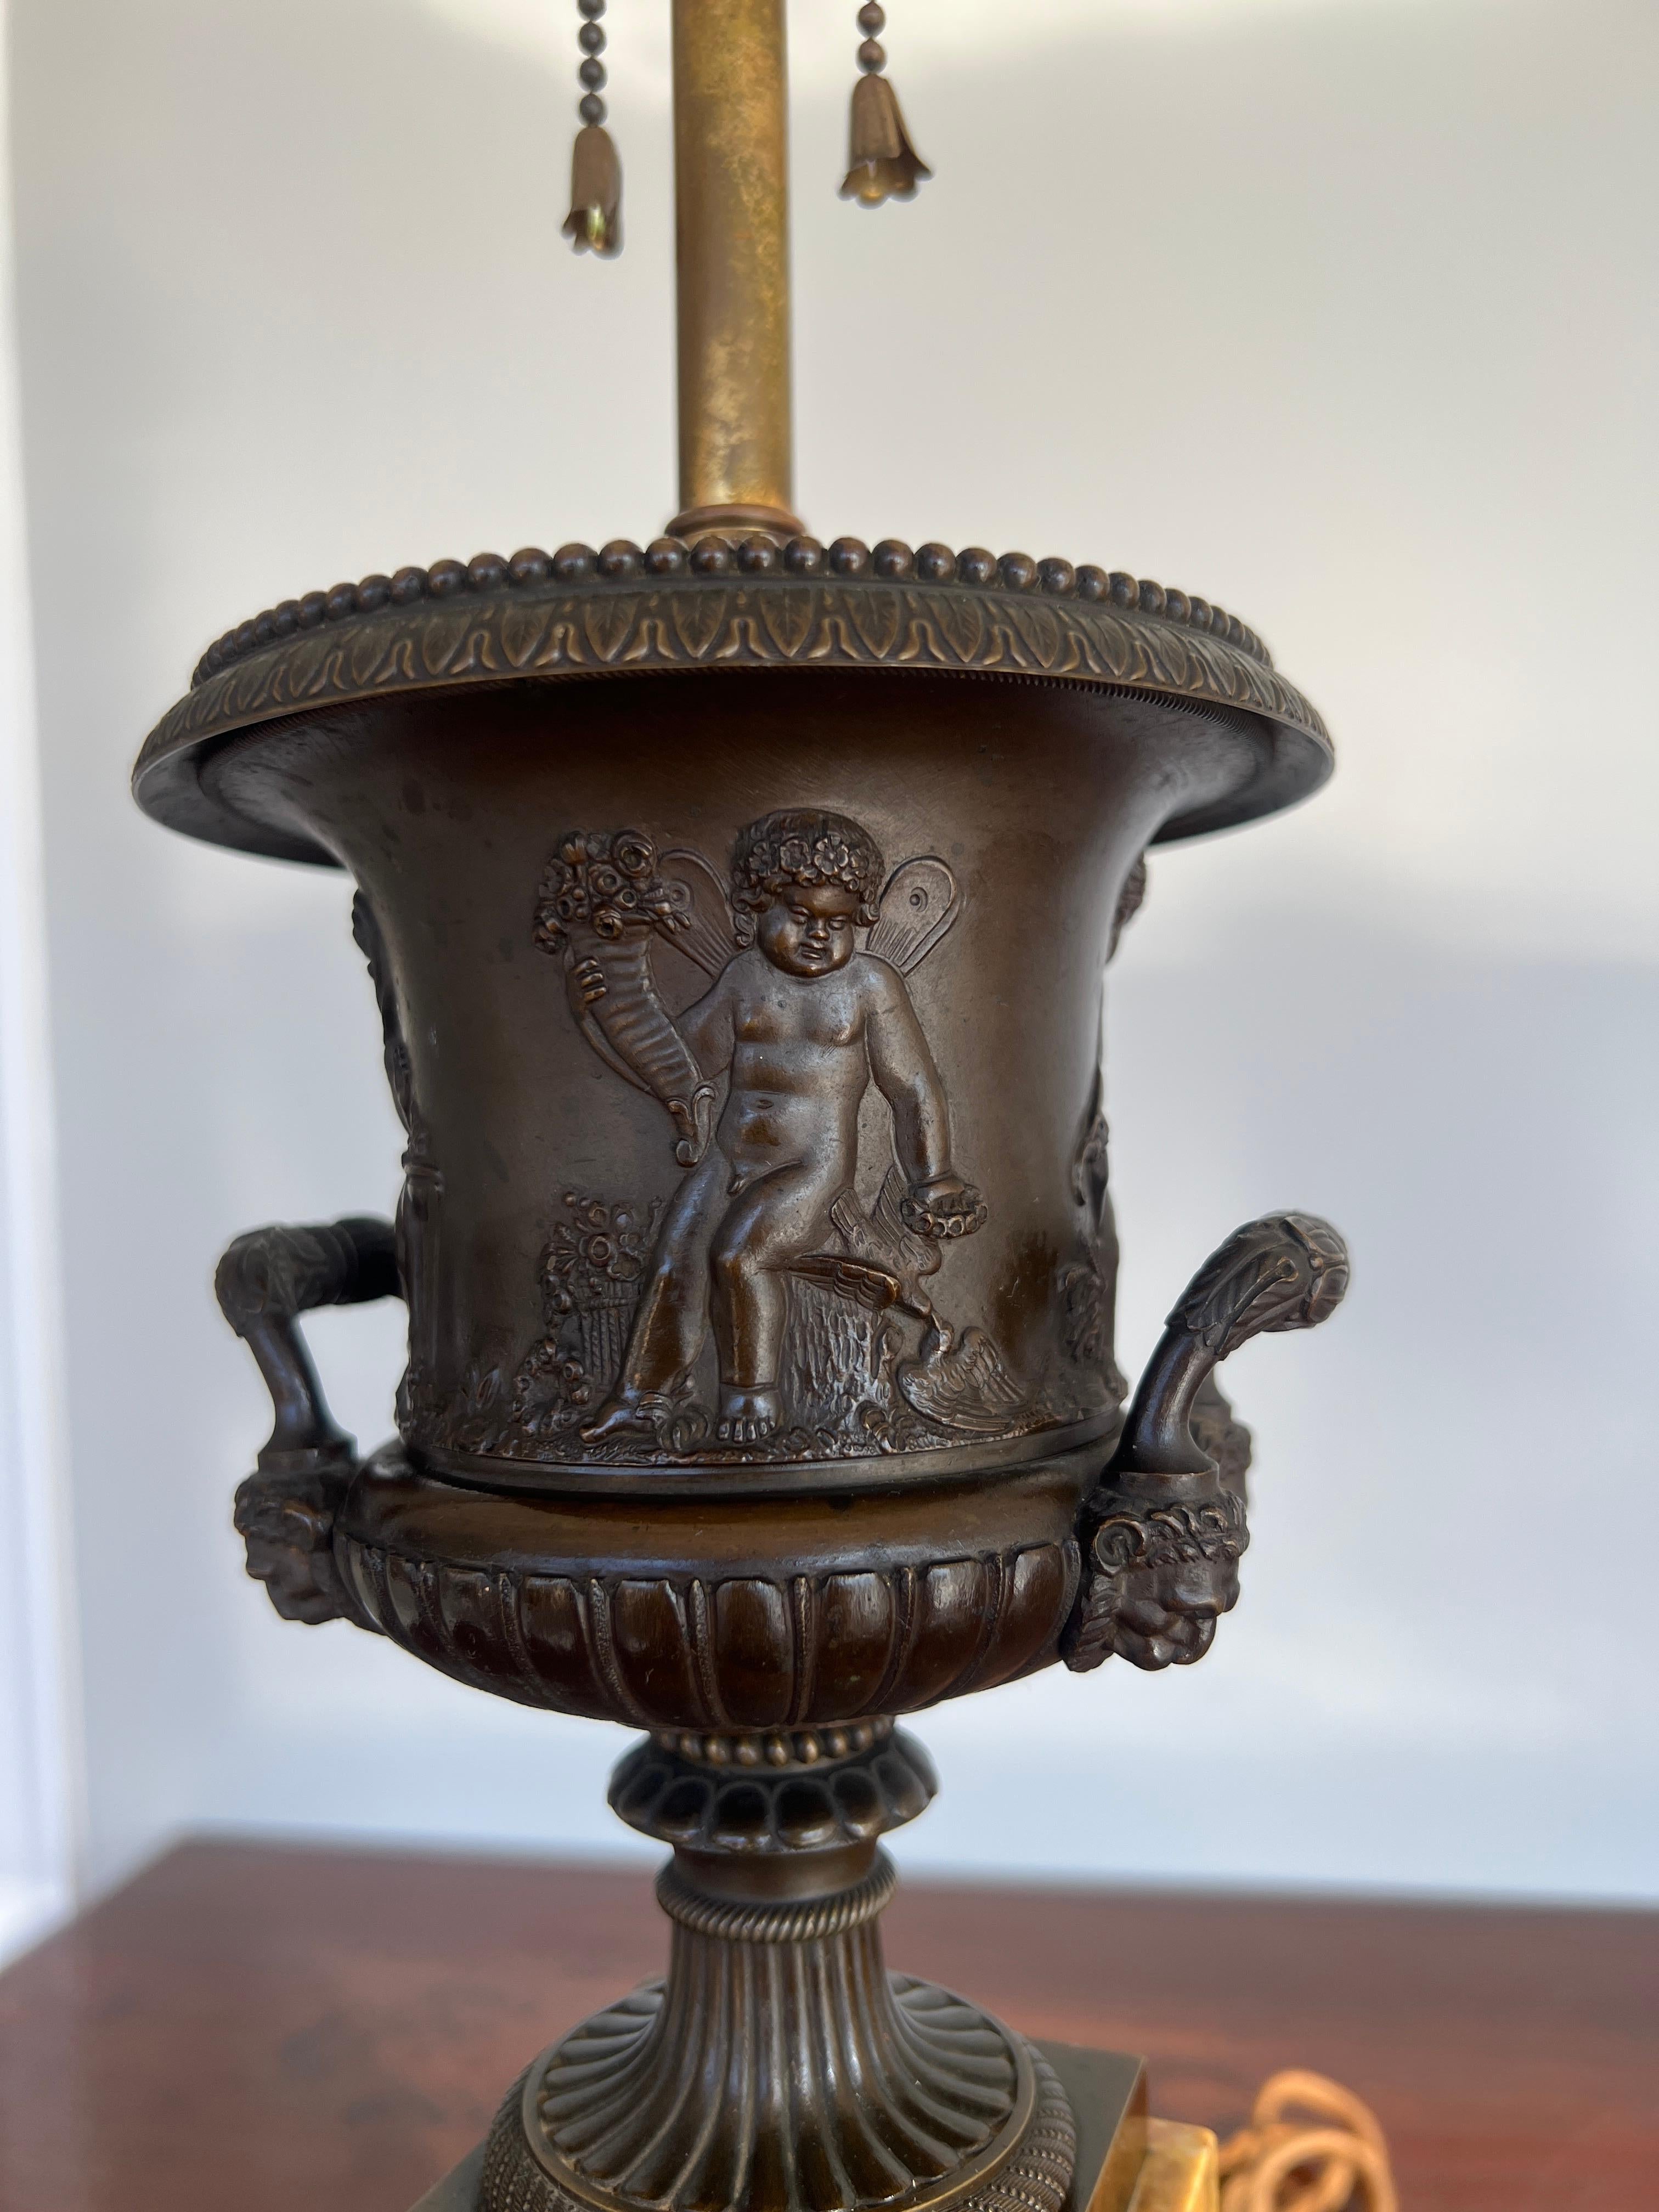 French, 19th century.

A pair of good quality bronze urns decorated with playful cherub or putti. The putti figures each represent one of the four season graces after the original mythology:
Eiar the goddess of Spring: adorned with a flower crown